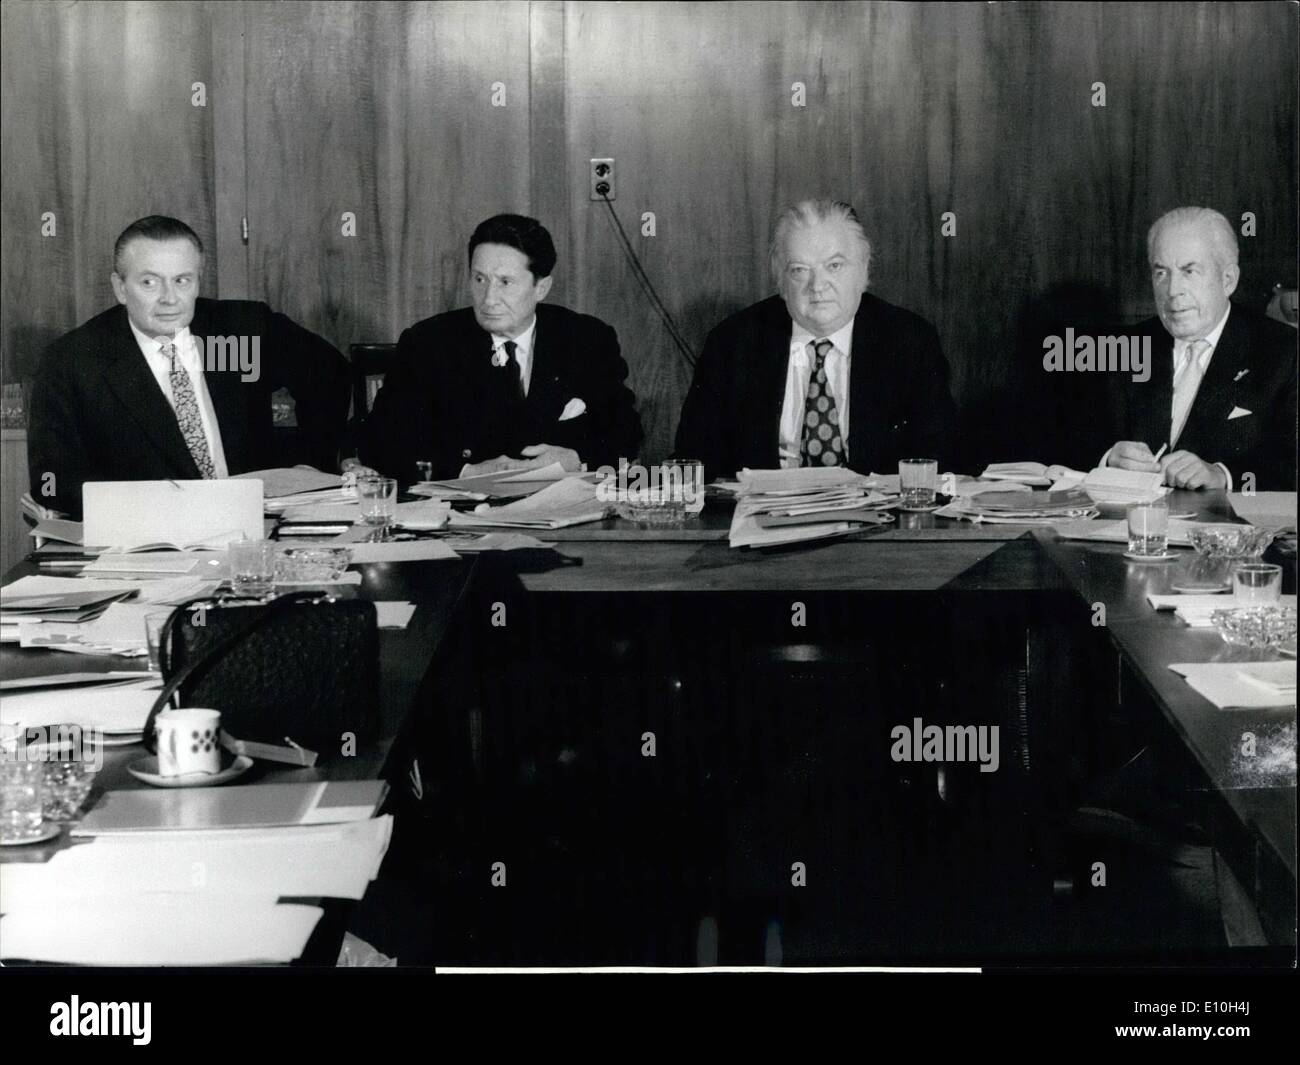 Nov. 11, 1972 - I.O.C.- Meeting in Lausanno: The International Olympic Committee met this week in Lausanne for ''Olympic talks'', but apparently without mentioning the Denver-renouncement for the Winter Games 1976. Photo shows the IOC-President and his vice-presidents. From the left Daume, de Beaumont Lord Killanin and Van Karnebeeck. Stock Photo